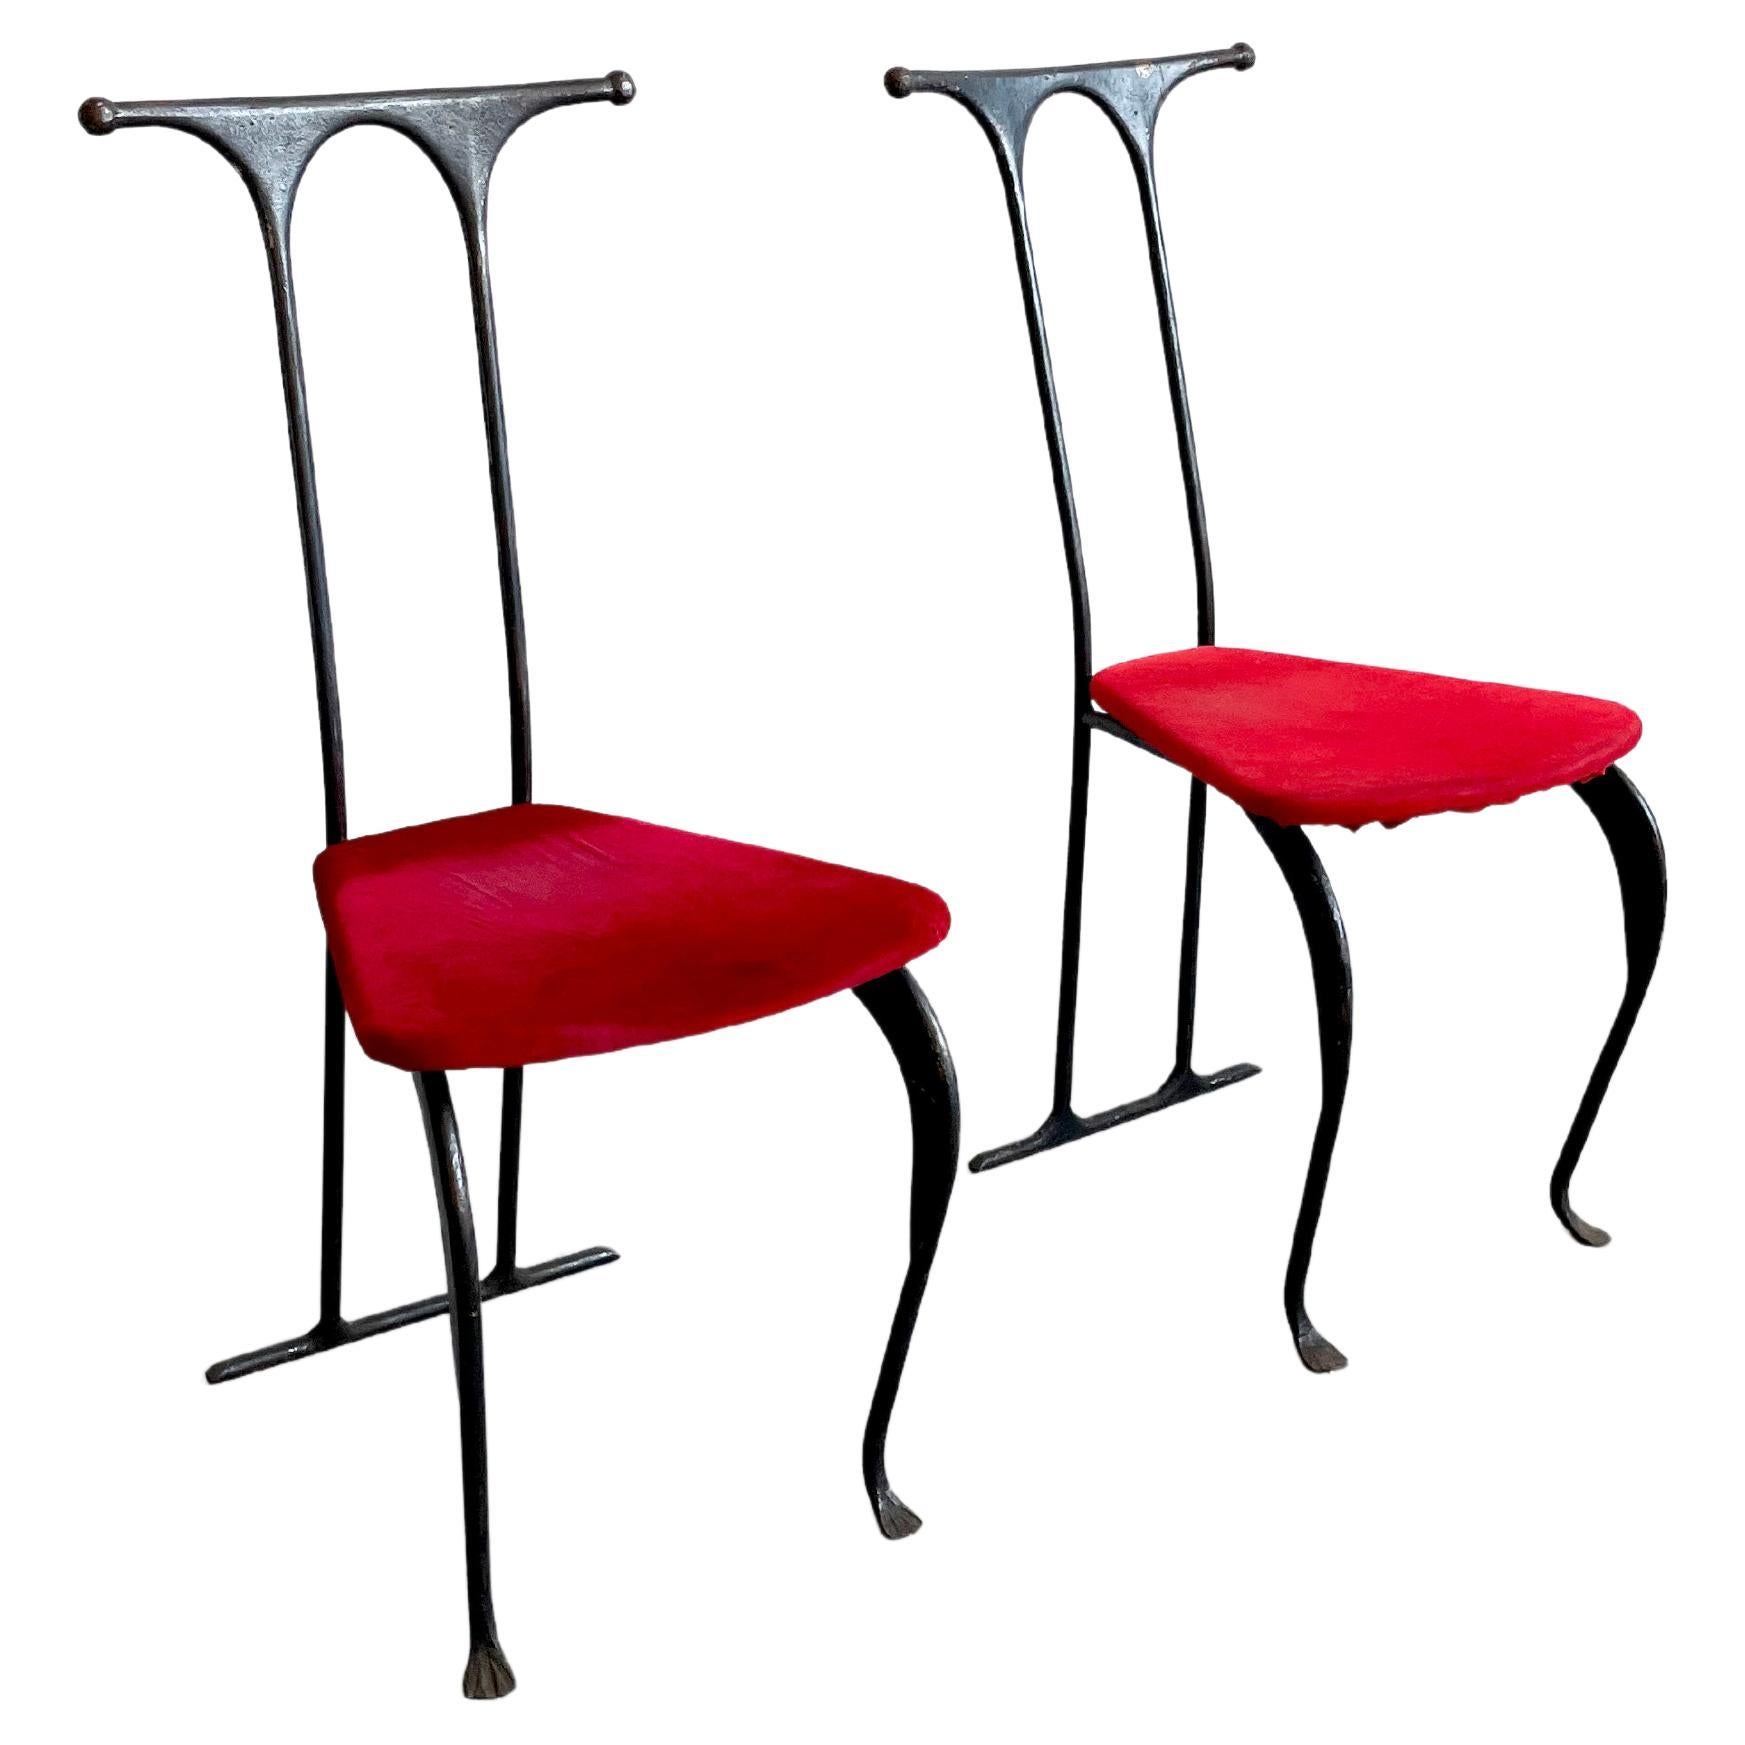 Pair of Postmodern Brutalist Artisanal Wrought Iron Chairs, Poland, 1980s